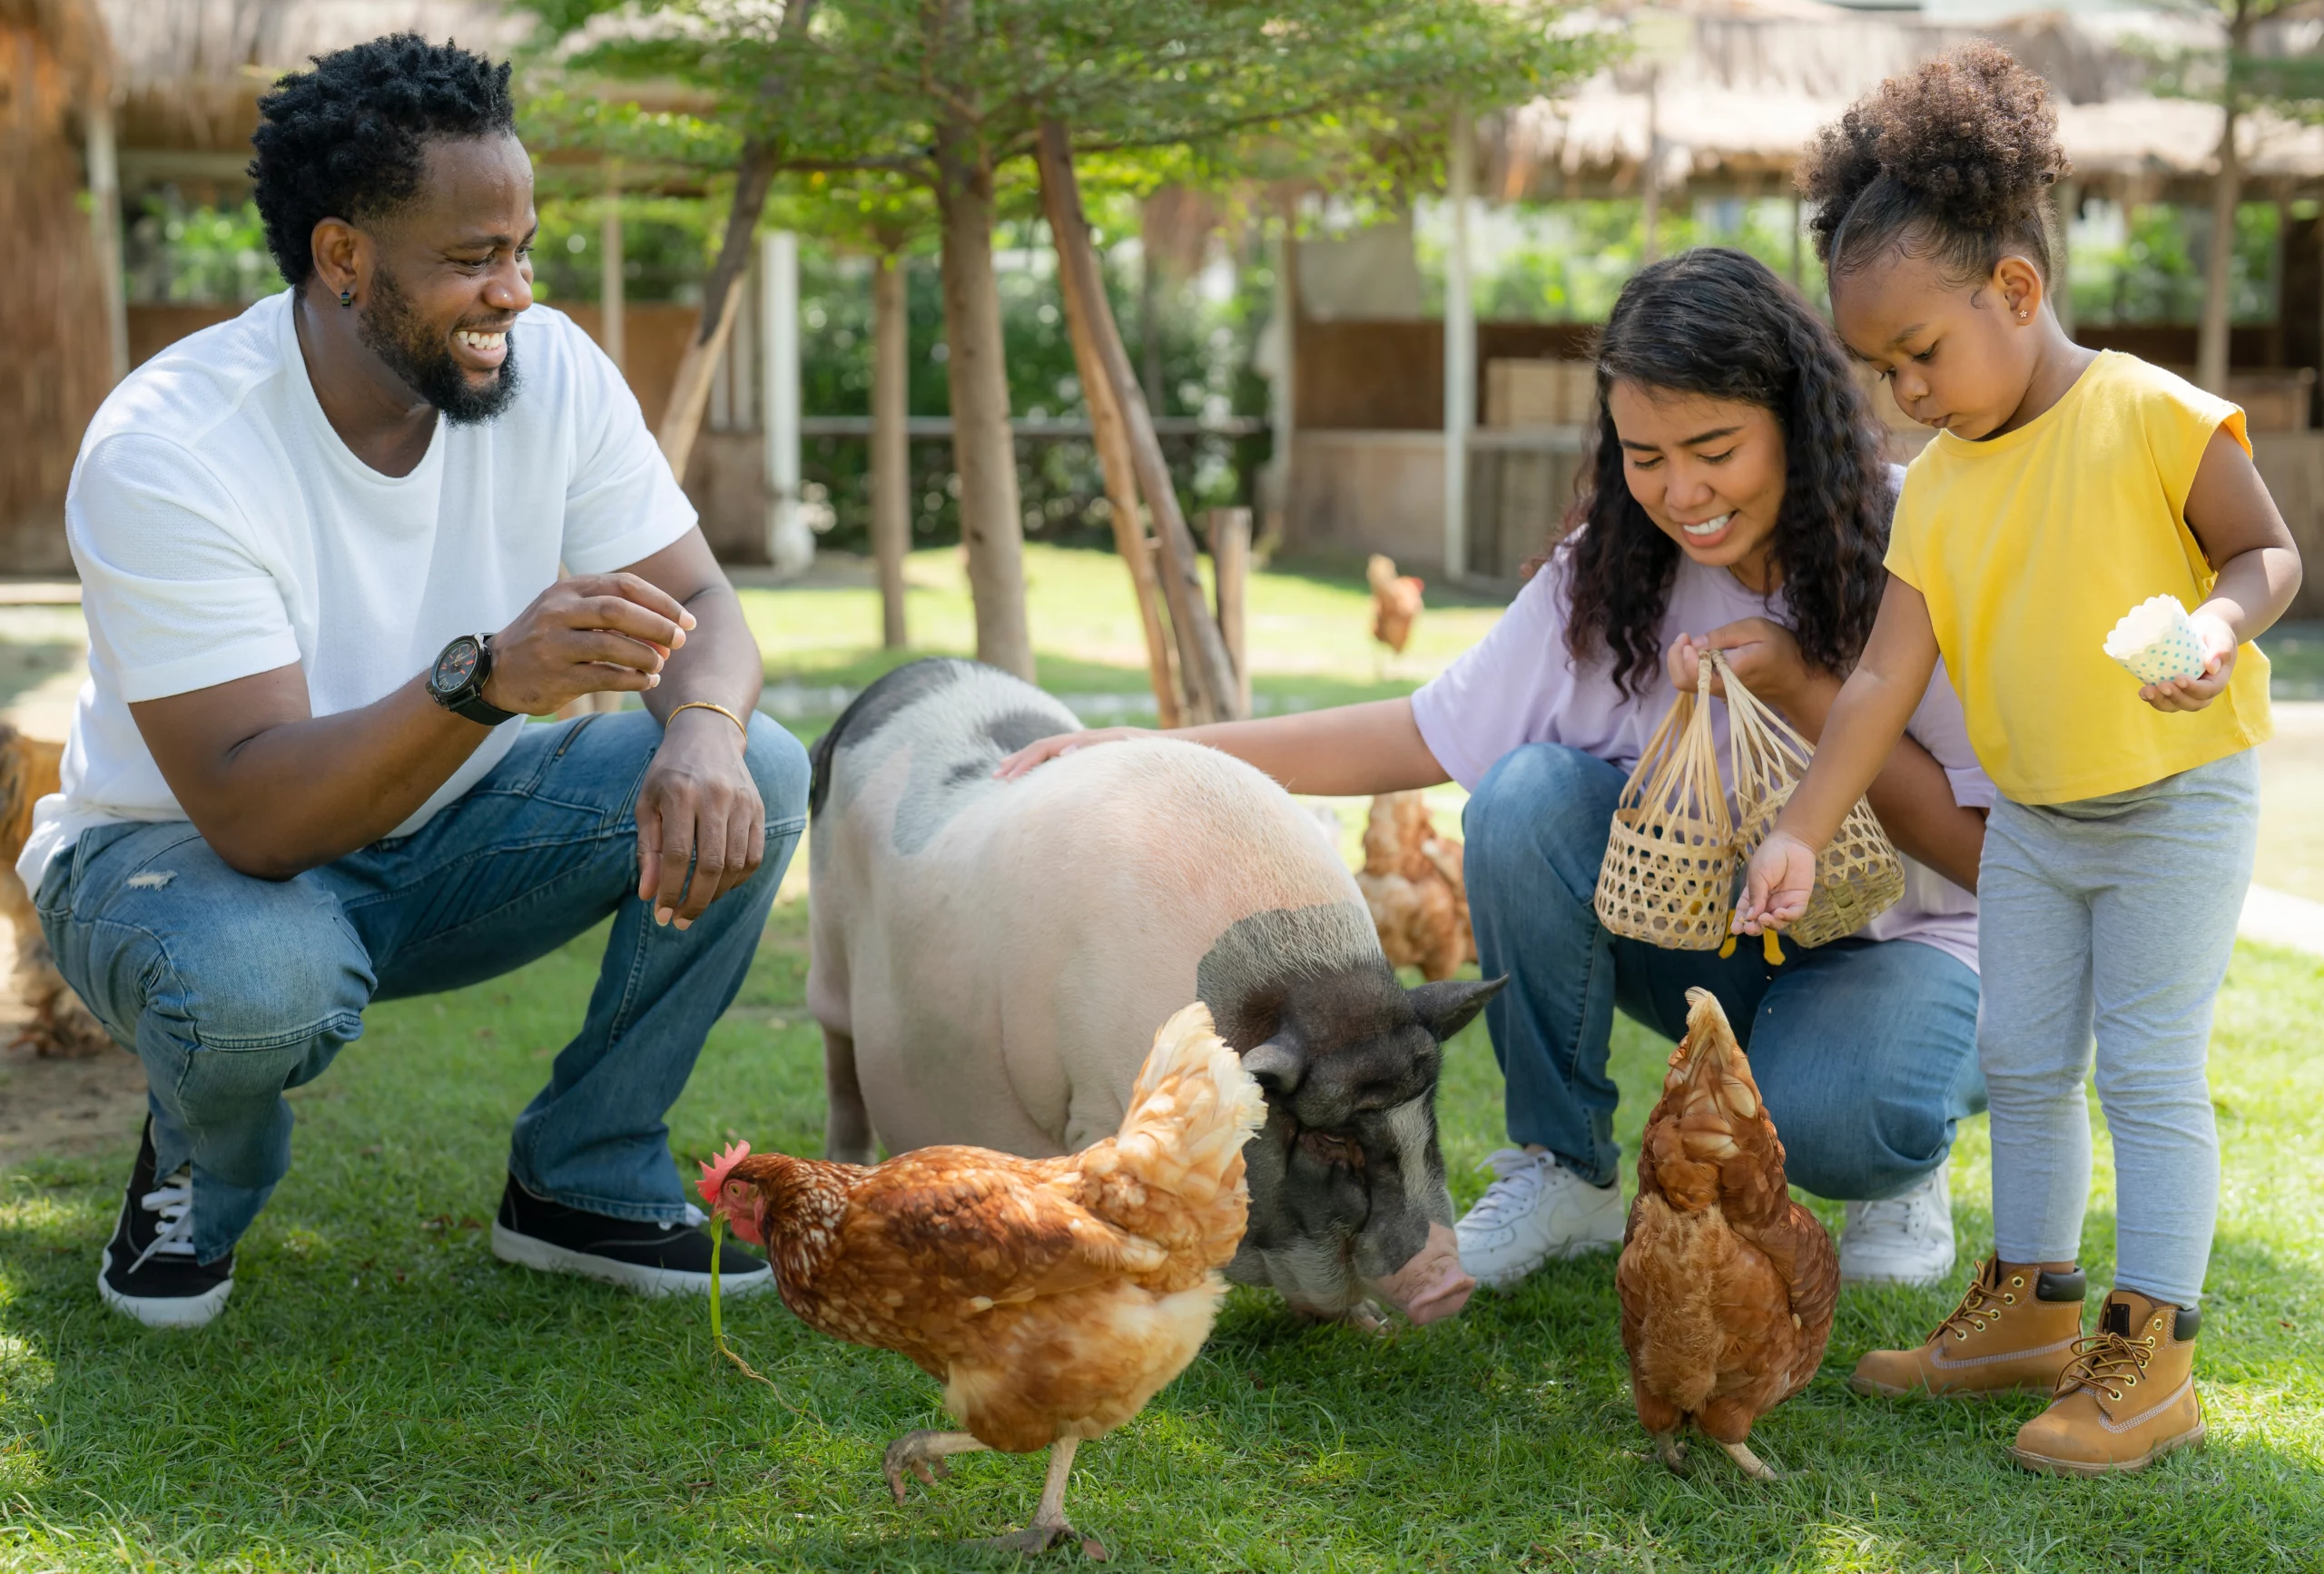 free activities for kids - look for local farms | Swoosh Finance